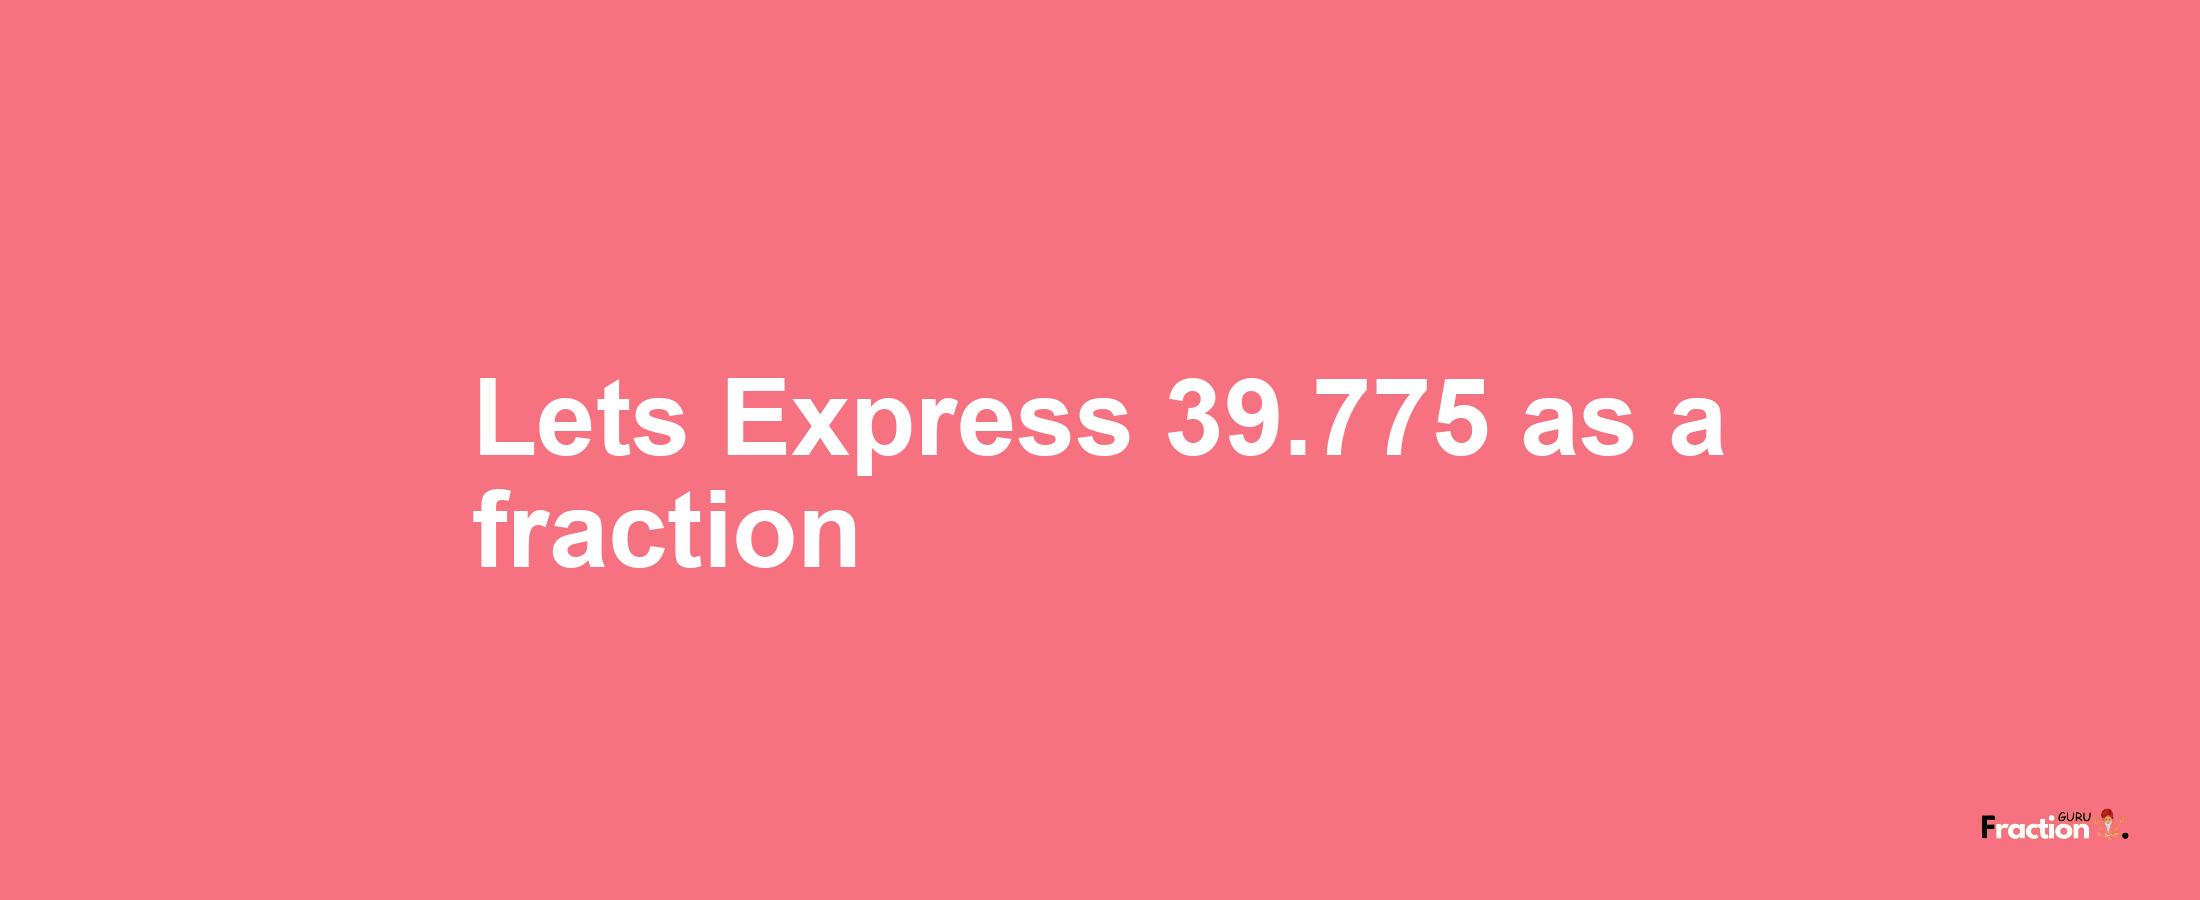 Lets Express 39.775 as afraction